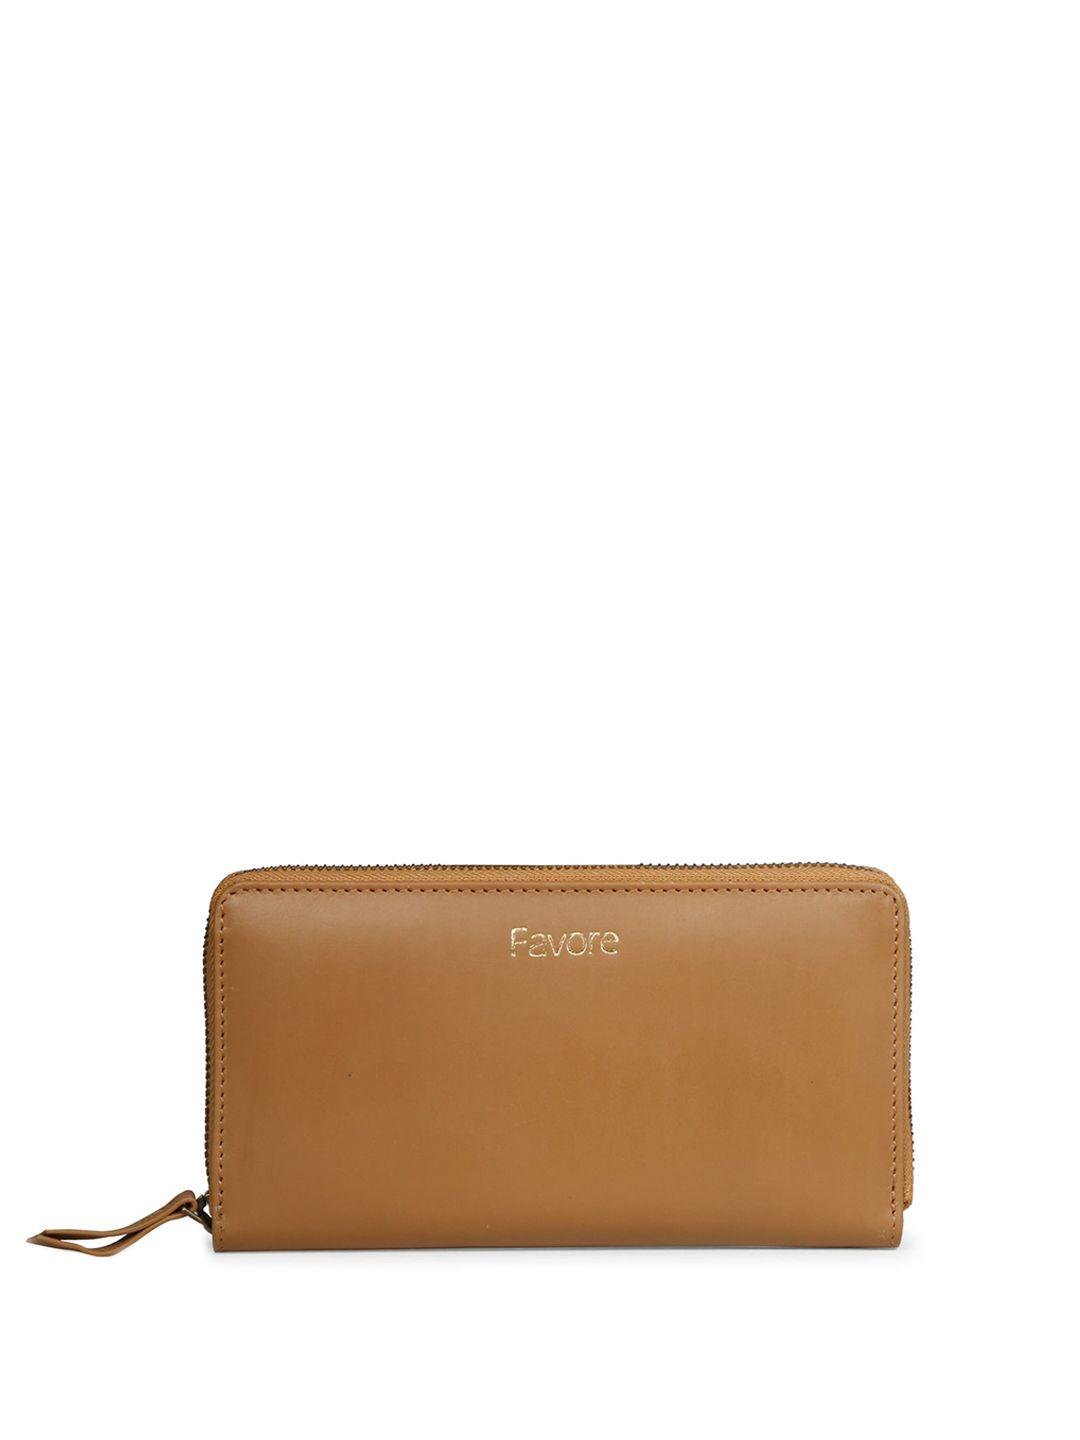 favore leather purse with zip pocket